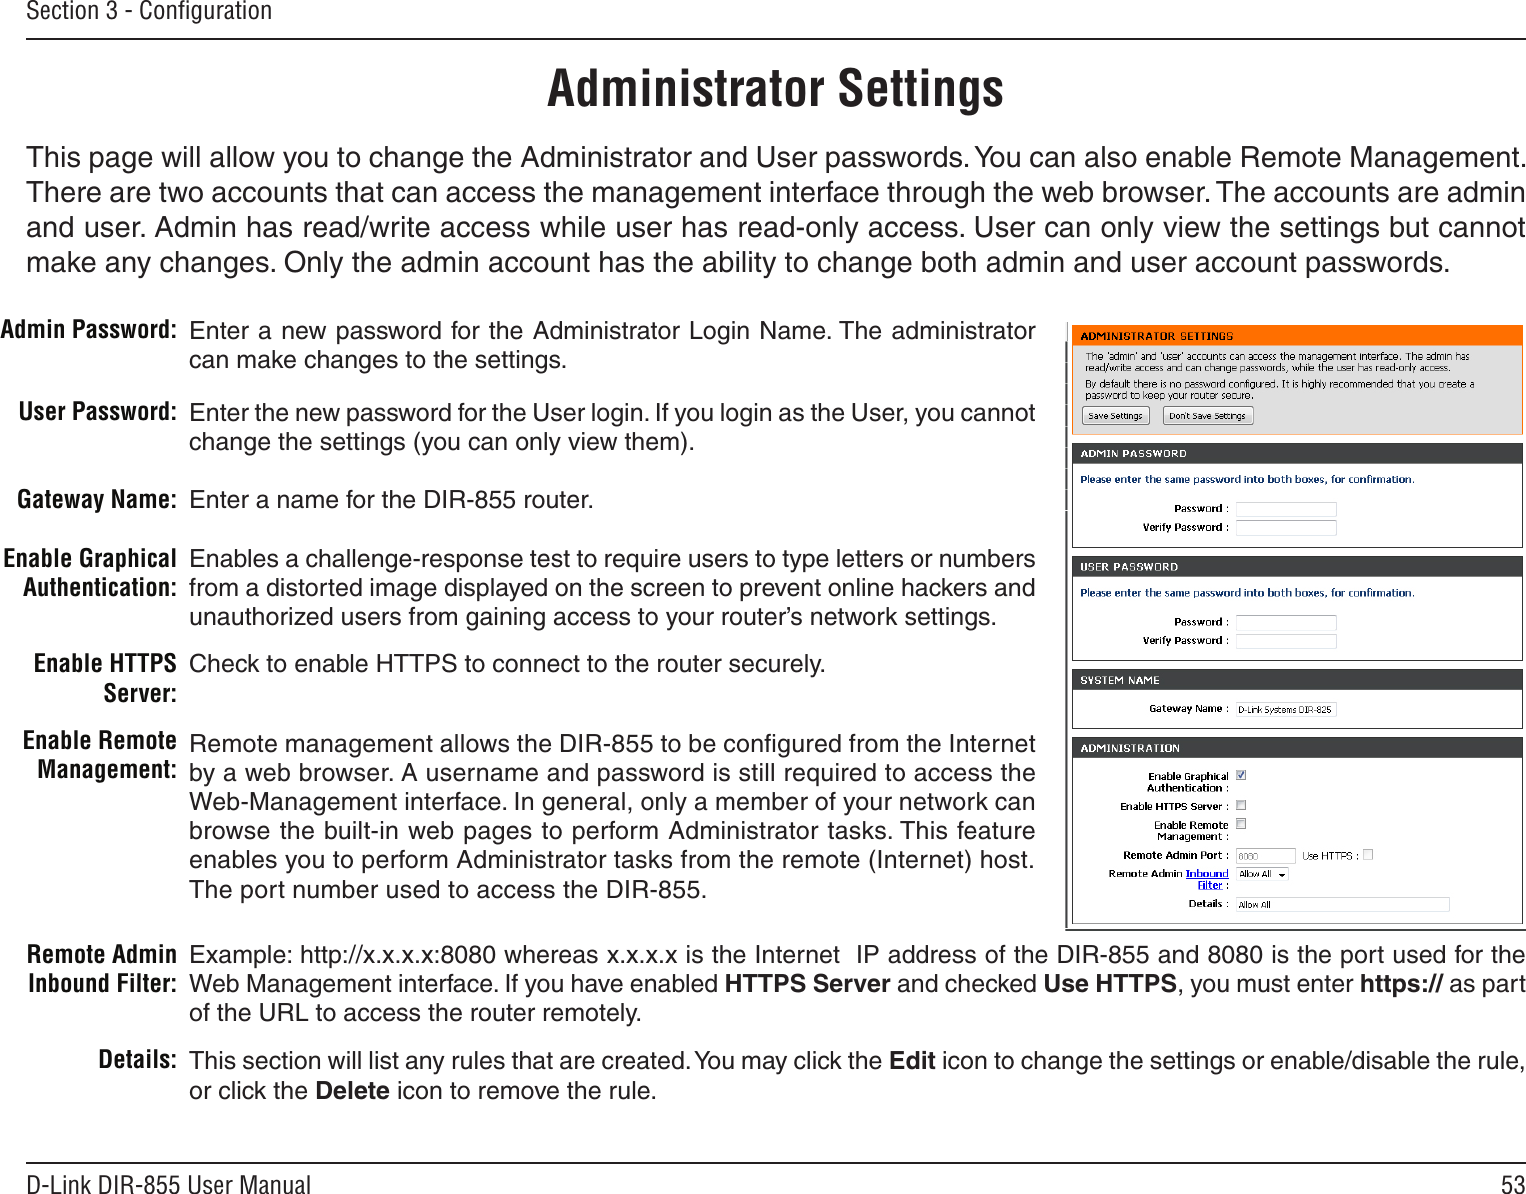 53D-Link DIR-855 User ManualSection 3 - ConﬁgurationAdministrator SettingsThis page will allow you to change the Administrator and User passwords. You can also enable Remote Management.  There are two accounts that can access the management interface through the web browser. The accounts are admin and user. Admin has read/write access while user has read-only access. User can only view the settings but cannot make any changes. Only the admin account has the ability to change both admin and user account passwords.Enter a new password for the Administrator Login Name. The administrator can make changes to the settings.Enter the new password for the User login. If you login as the User, you cannot change the settings (you can only view them).Enter a name for the DIR-855 router.Enables a challenge-response test to require users to type letters or numbers from a distorted image displayed on the screen to prevent online hackers and unauthorized users from gaining access to your router’s network settings.Check to enable HTTPS to connect to the router securely.Remote management allows the DIR-855 to be conﬁgured from the Internet by a web browser. A username and password is still required to access the Web-Management interface. In general, only a member of your network can browse the built-in web pages to perform Administrator tasks. This feature enables you to perform Administrator tasks from the remote (Internet) host.The port number used to access the DIR-855.Admin Password:User Password:Gateway Name:Enable Graphical Authentication:Enable HTTPS Server:Enable Remote Management:Remote Admin Inbound Filter:Details:Example: http://x.x.x.x:8080 whereas x.x.x.x is the Internet  IP address of the DIR-855 and 8080 is the port used for the Web Management interface. If you have enabled HTTPS Server and checked Use HTTPS, you must enter https:// as part of the URL to access the router remotely.This section will list any rules that are created. You may click the Edit icon to change the settings or enable/disable the rule, or click the Delete icon to remove the rule.